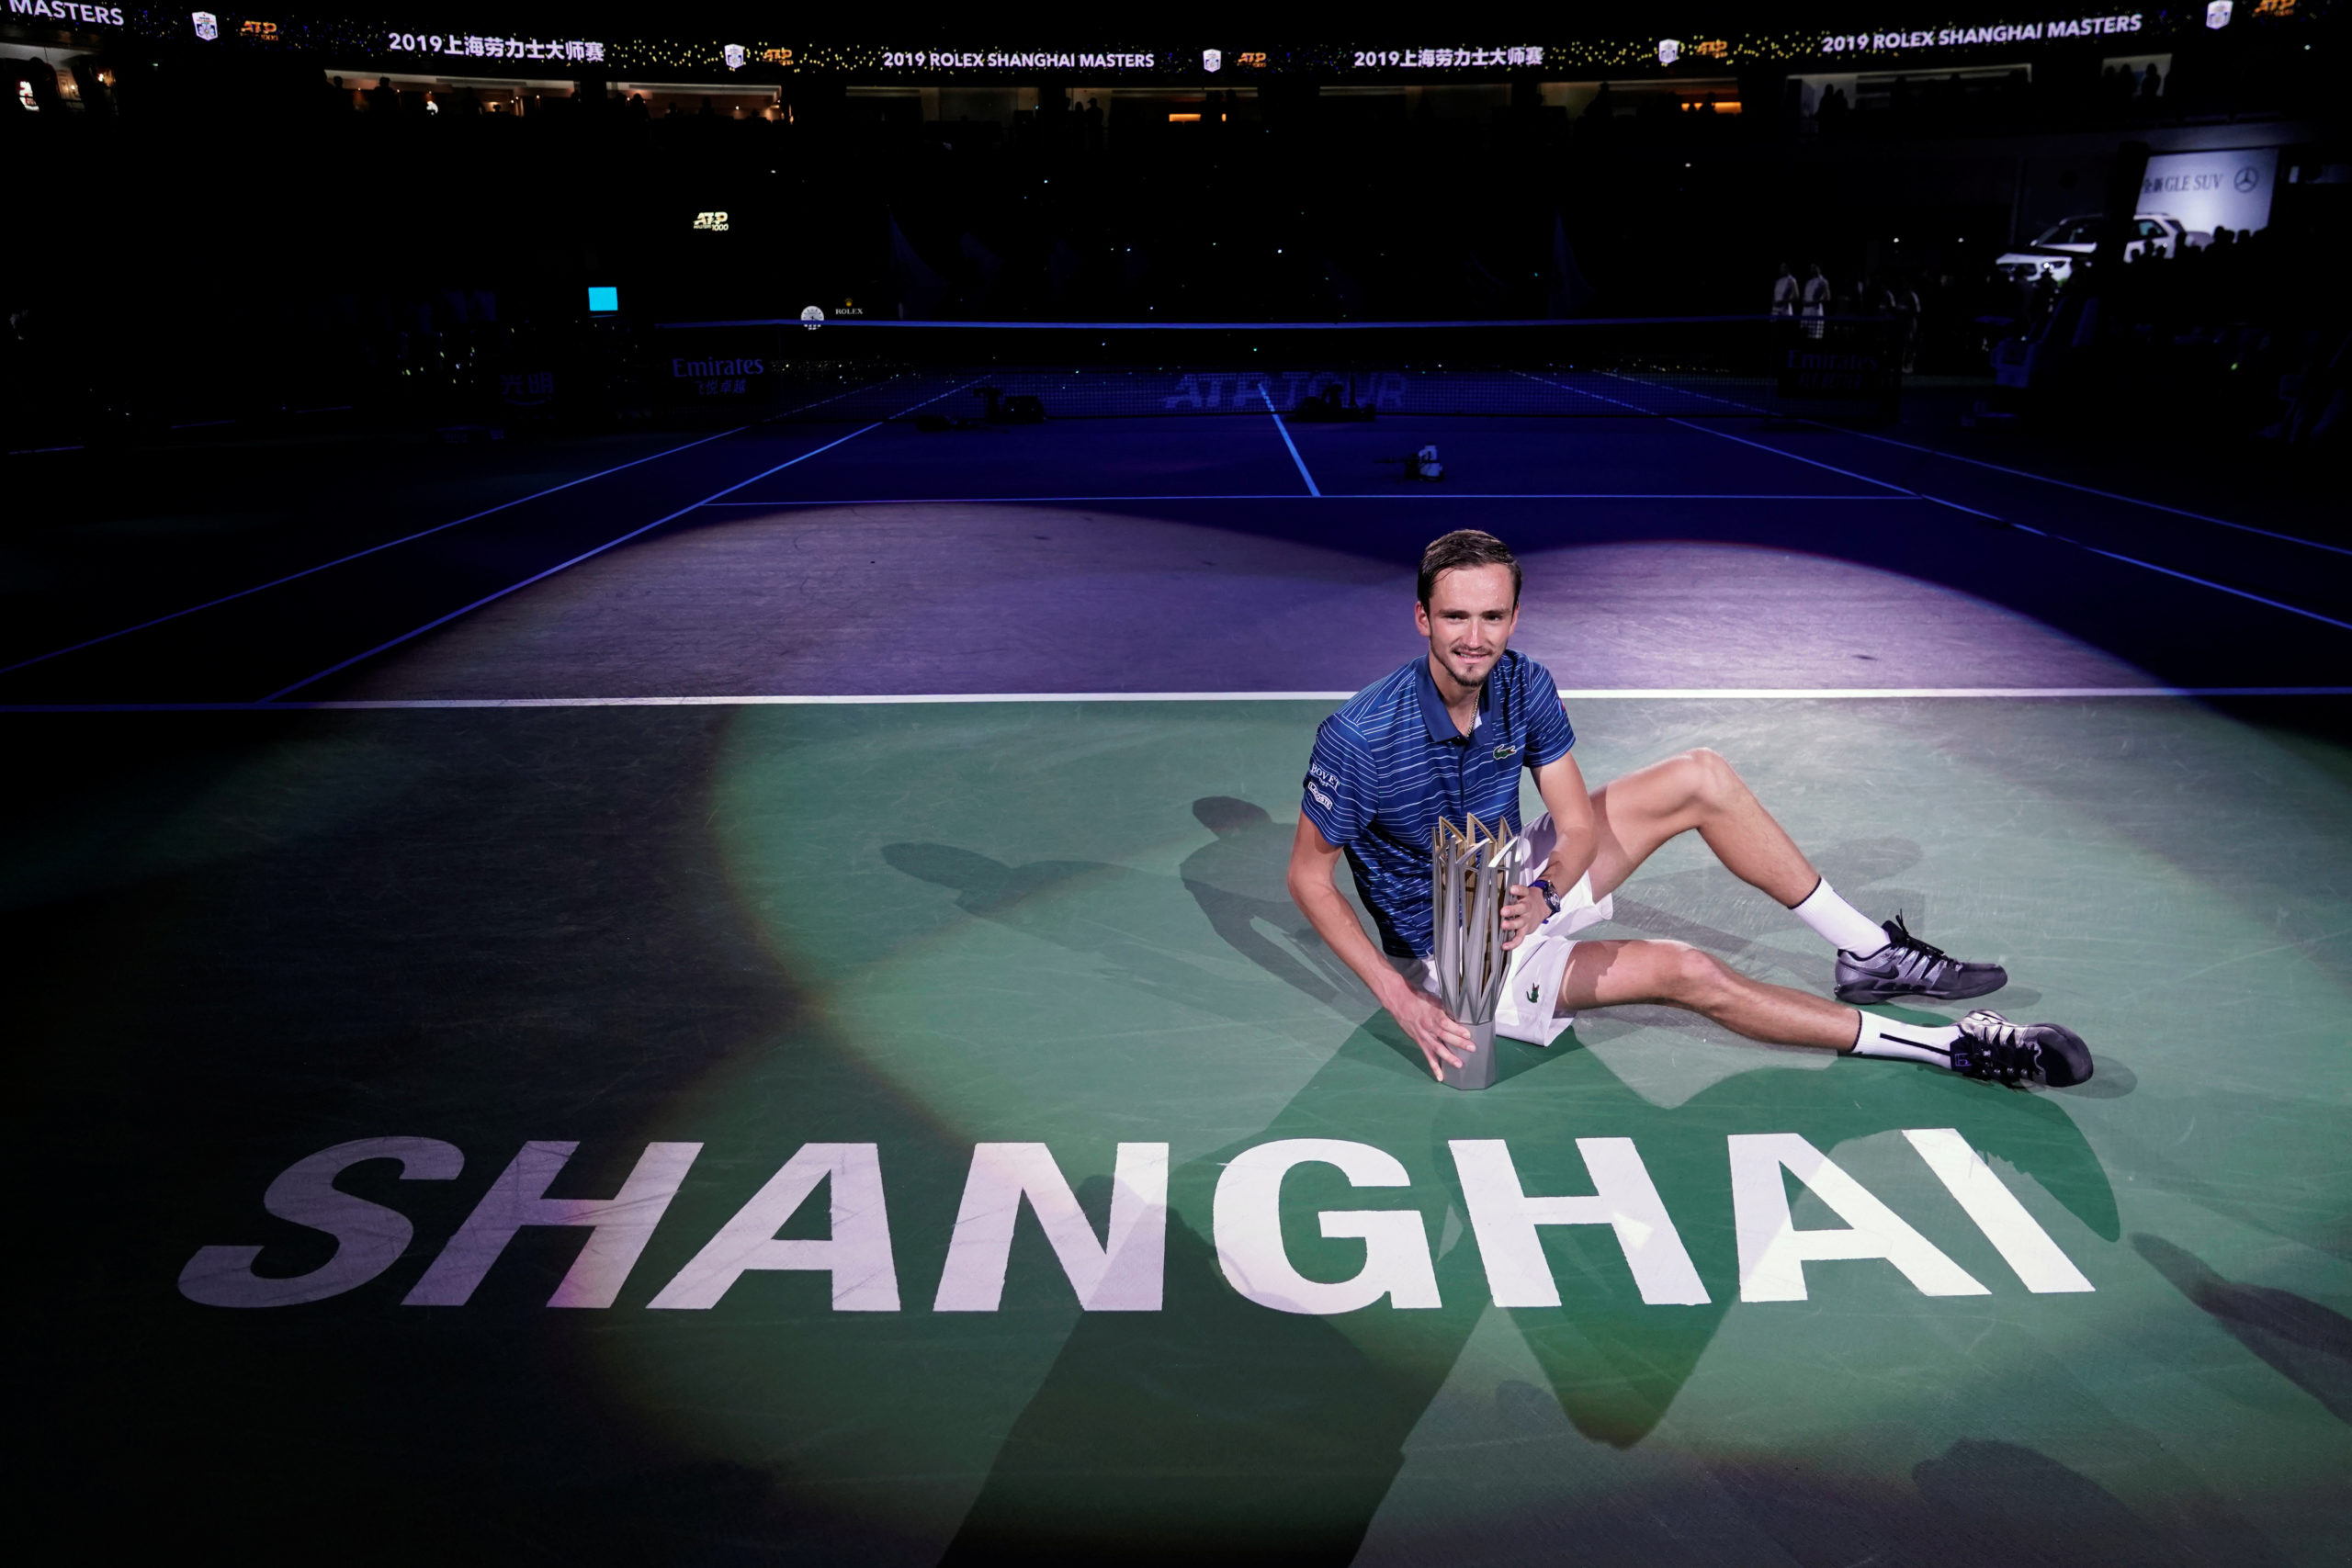 Daniil Medvedev of Russia celebrates winning Shanghai Masters with his trophy.